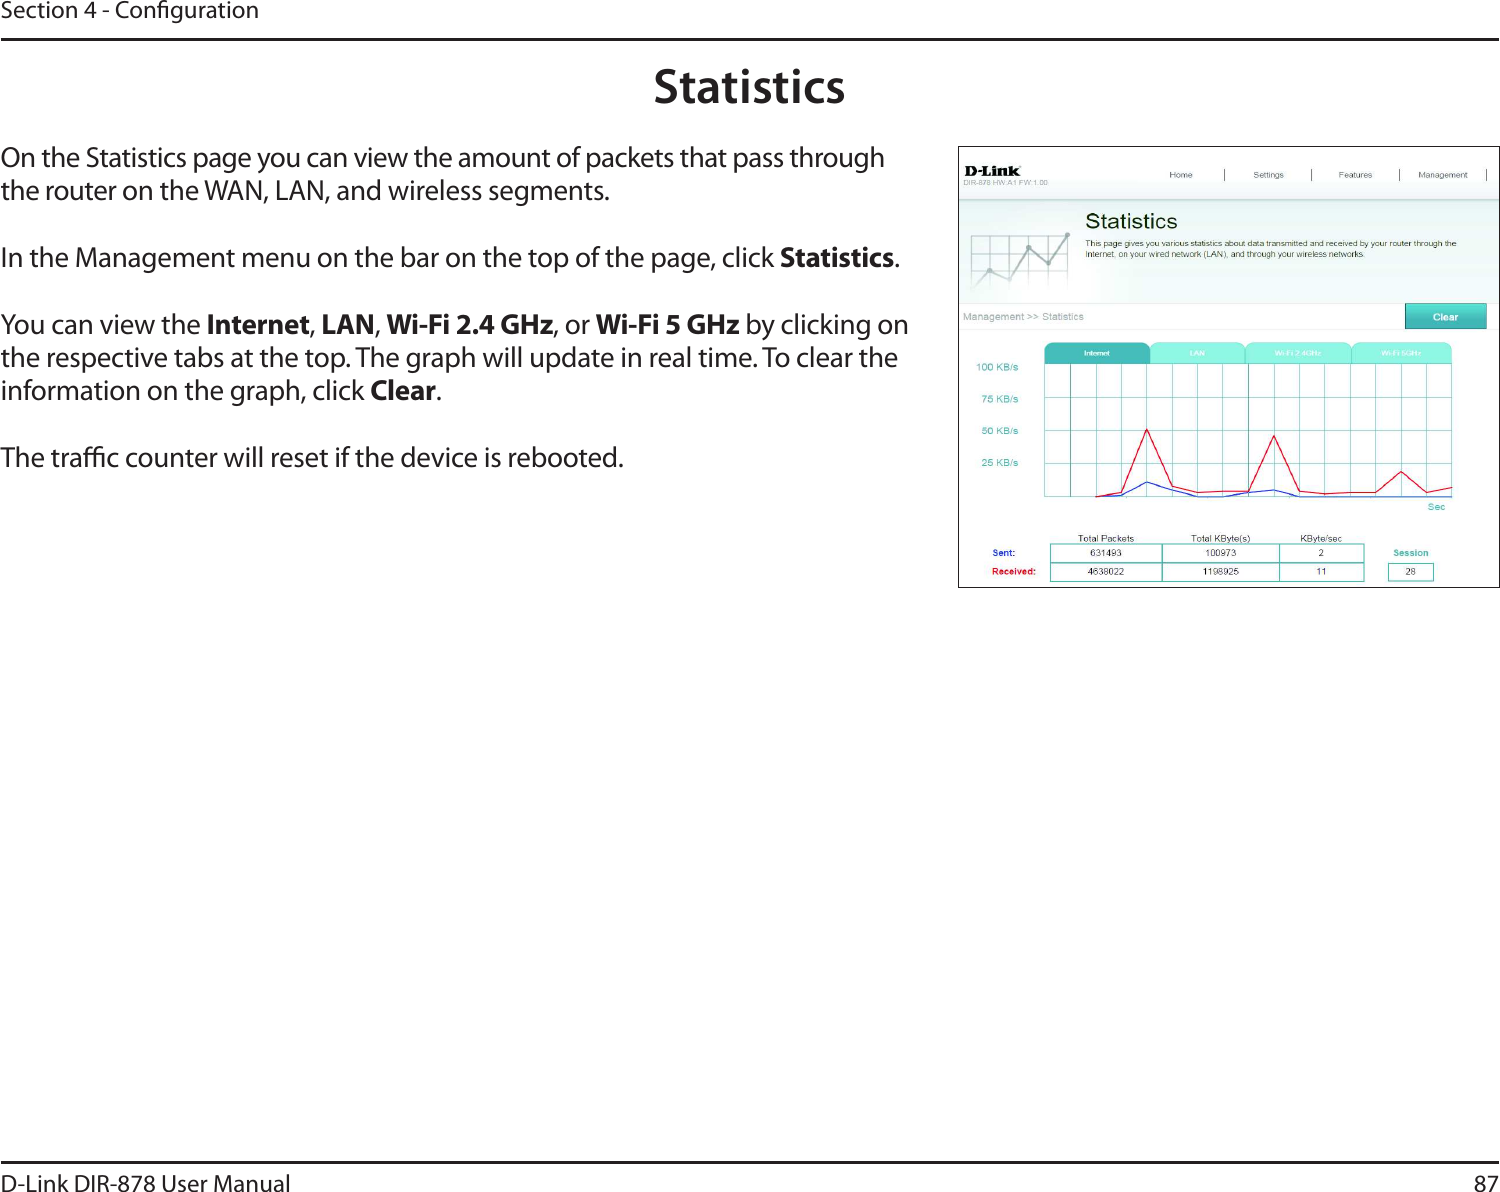 87D-Link DIR-878 User ManualSection 4 - CongurationStatisticsOn the Statistics page you can view the amount of packets that pass through the router on the WAN, LAN, and wireless segments.In the Management menu on the bar on the top of the page, click Statistics.You can view the Internet, -&quot;/, 8J&apos;J()[, or 8J&apos;J()[ by clicking on the respective tabs at the top. The graph will update in real time. To clear the information on the graph, click Clear.The trac counter will reset if the device is rebooted.